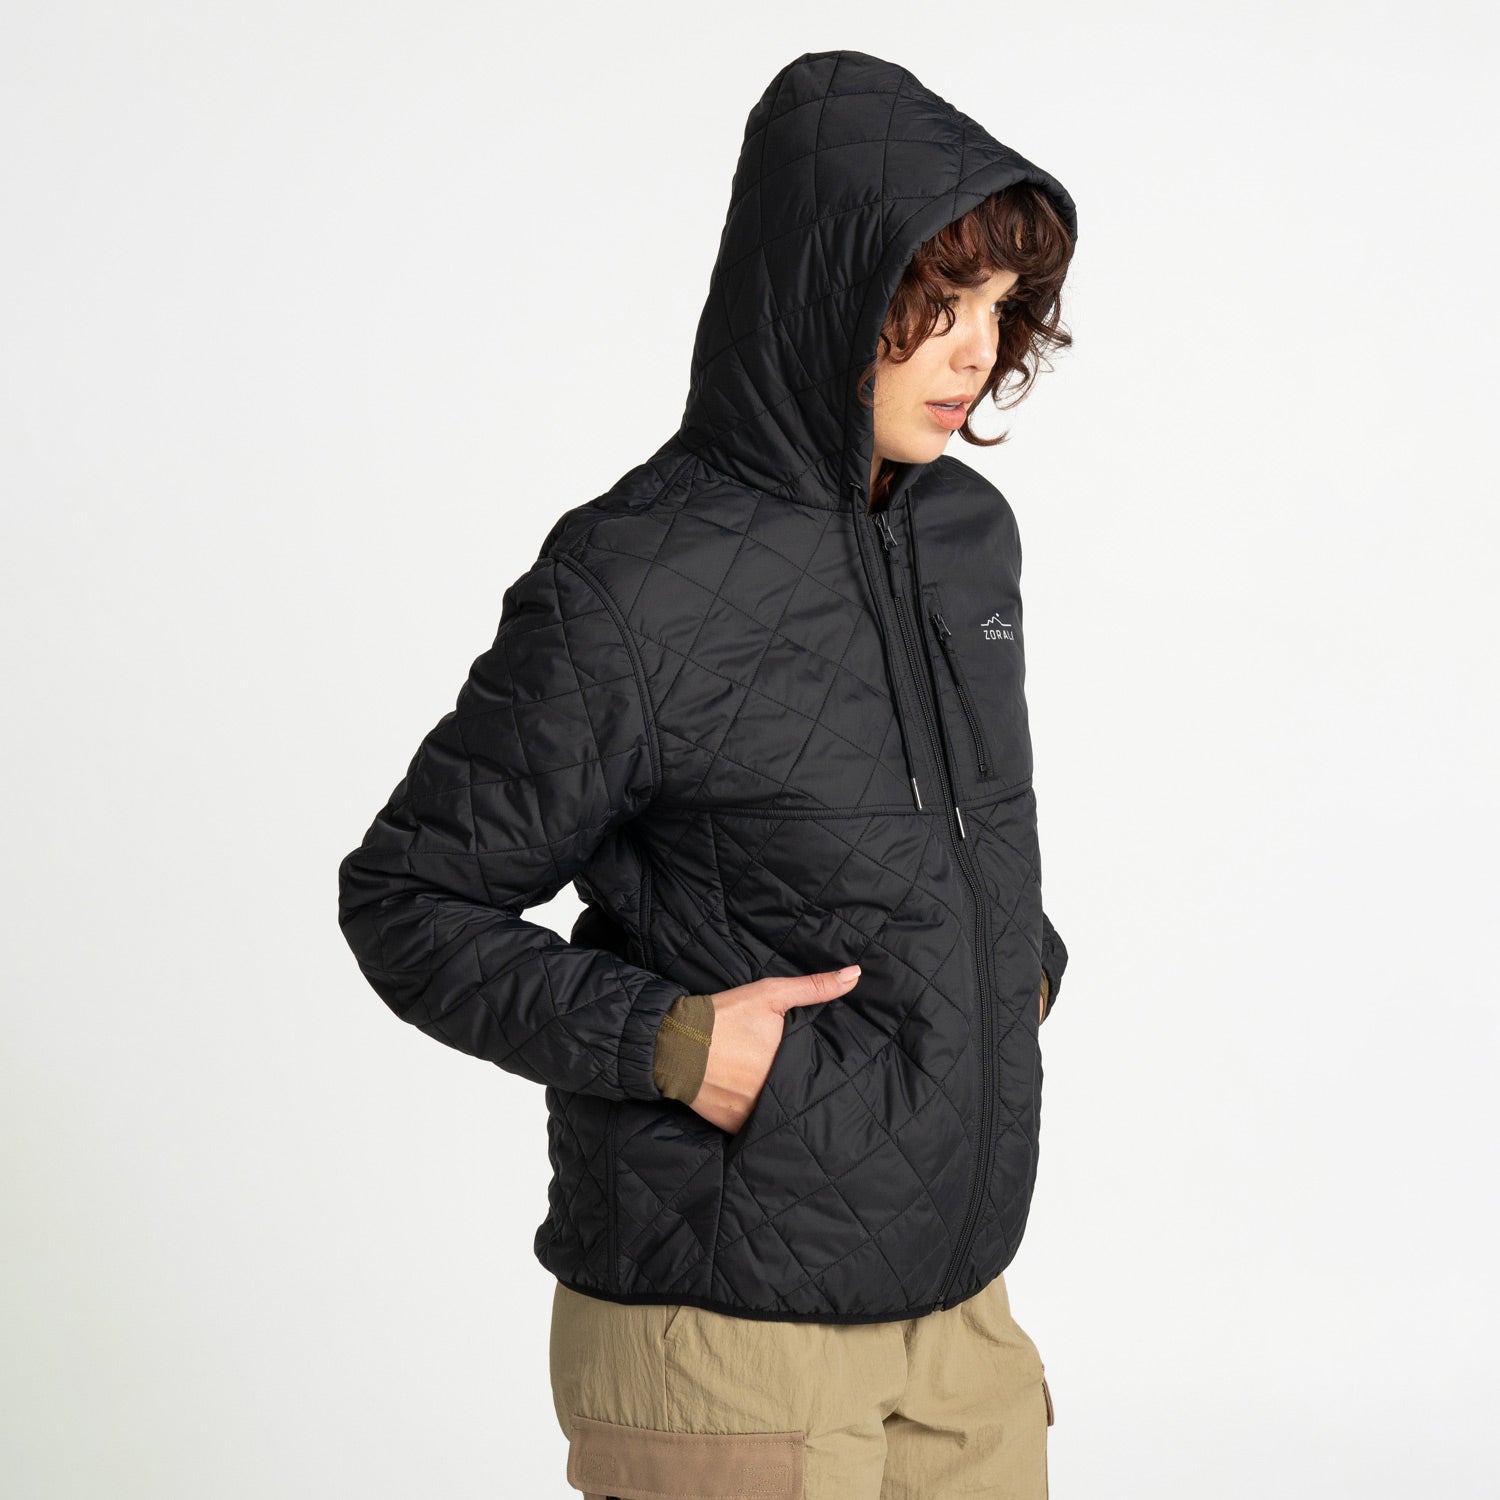 Womens Insulated Jacket Black